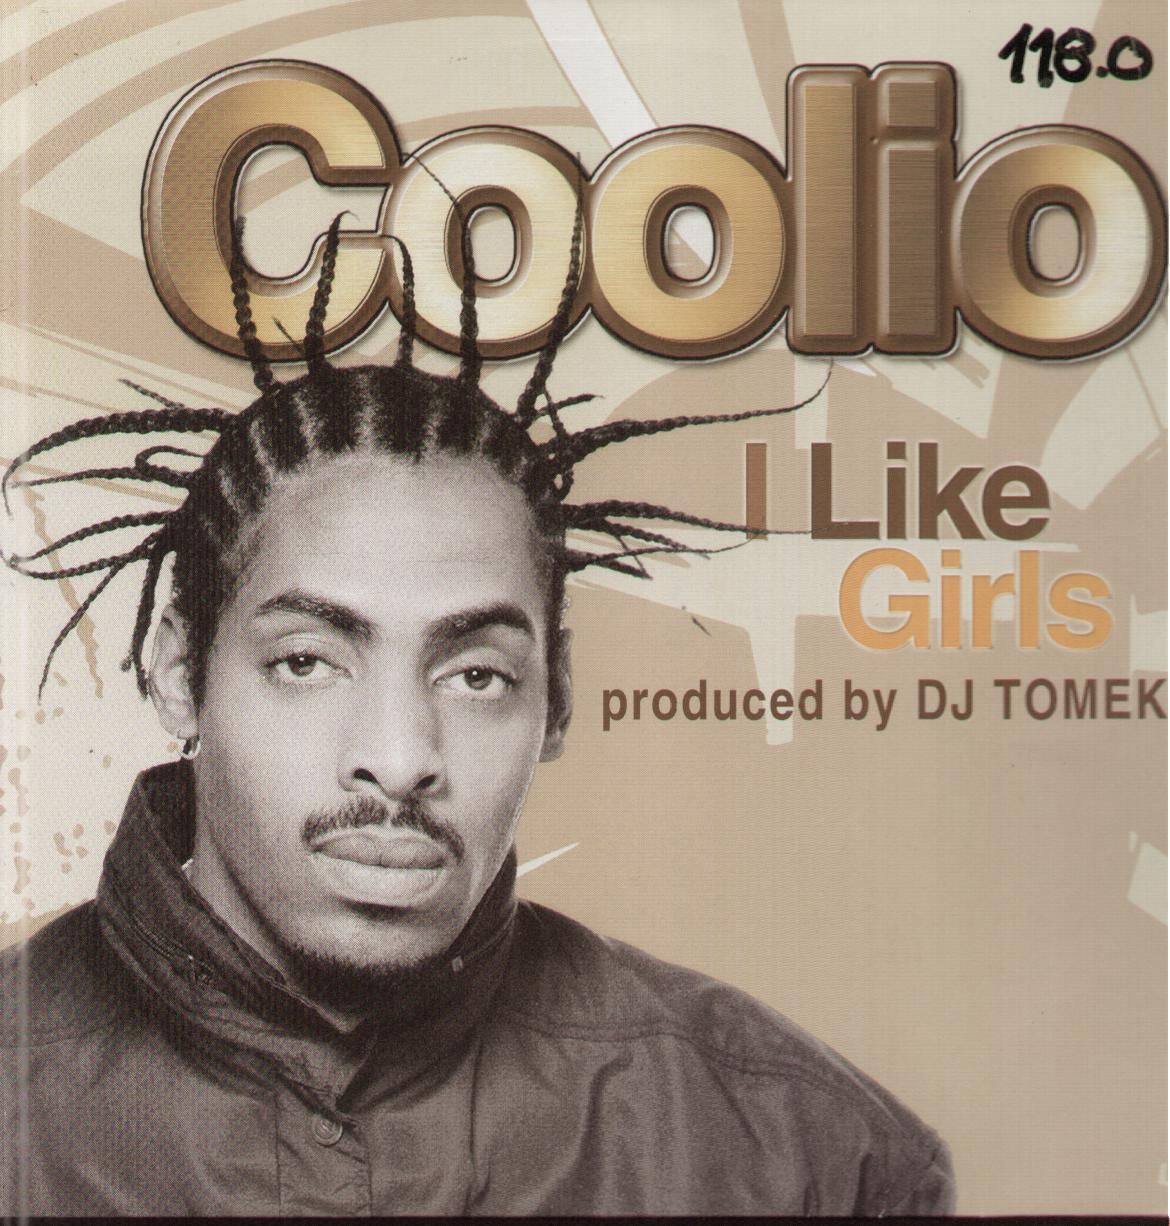 coolio-scandal